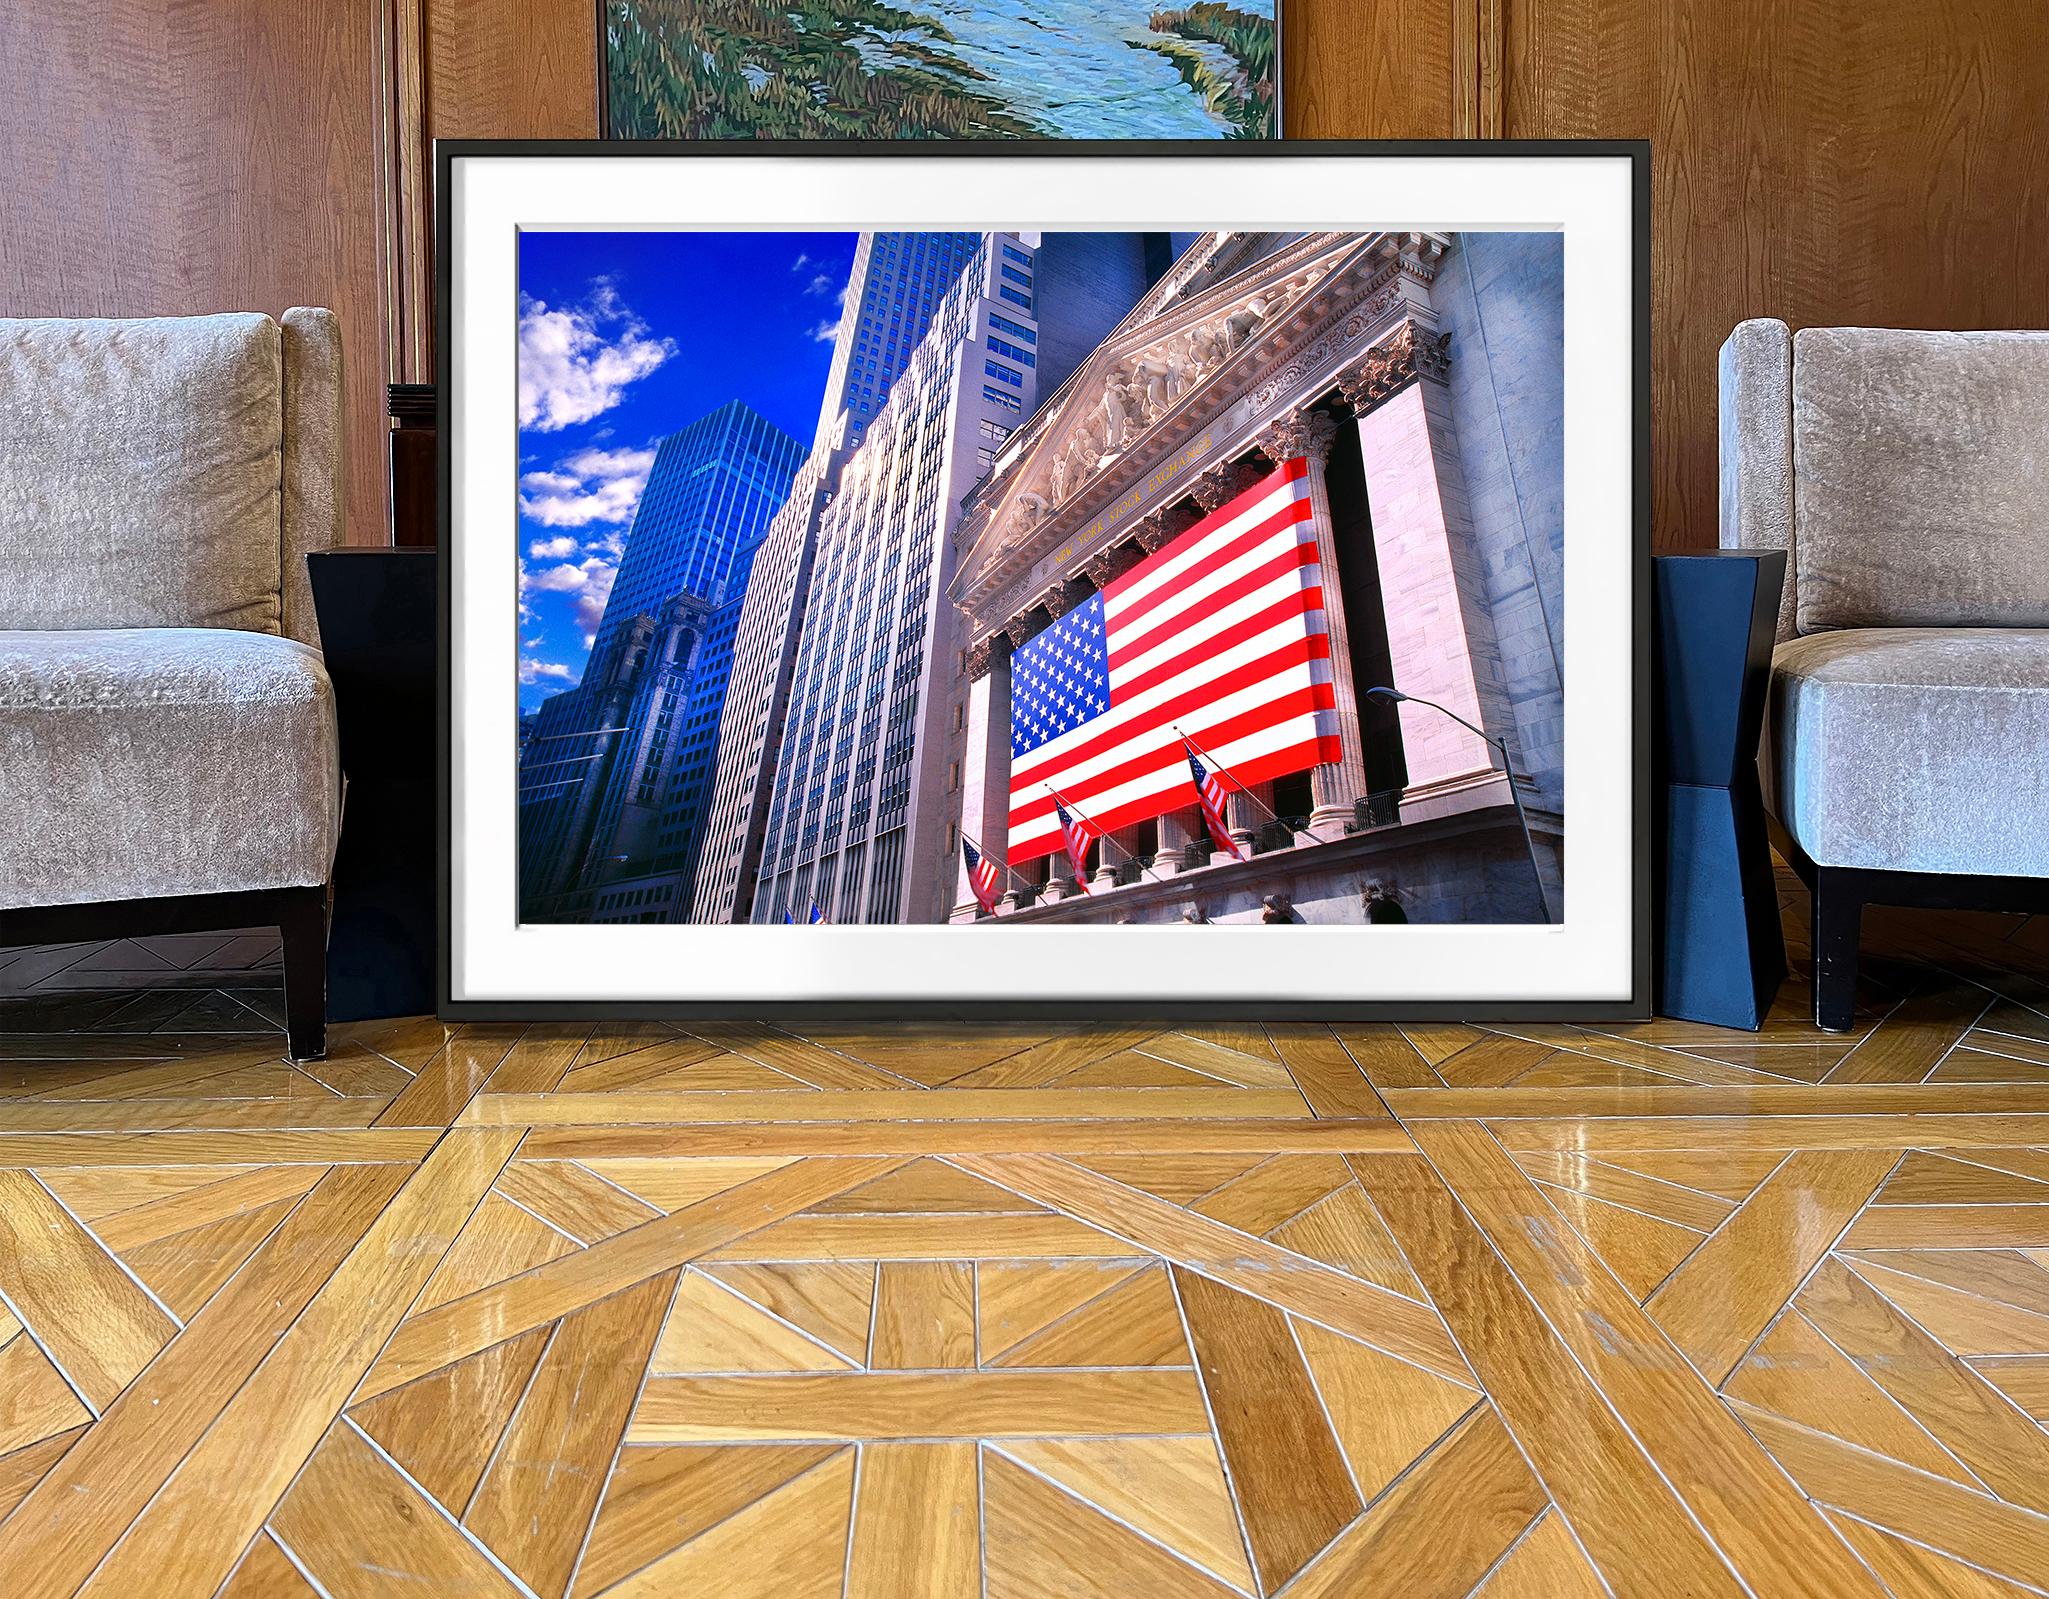 The symbol of American Capitalism is cloaked in the symbol of American Freedom.  A monumental American Flag drapes the shiny facade of the New York Stock Exchange.  Bright light illuminates the scene, adding to a sense of buoyant optimism.  The